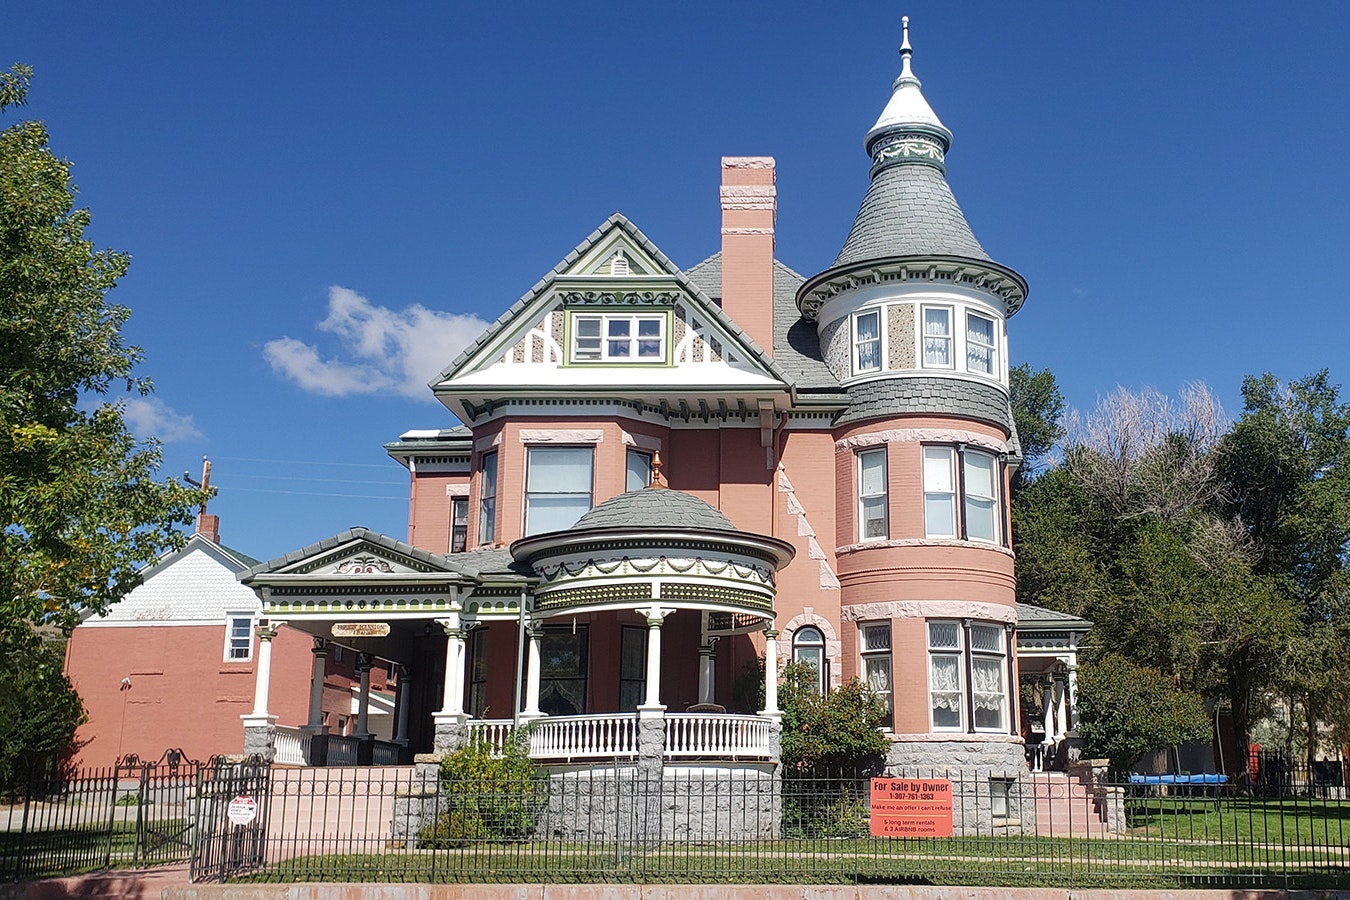 The Ferris Mansion at 607 W. Maple St. in Rawlins, Wyoming.